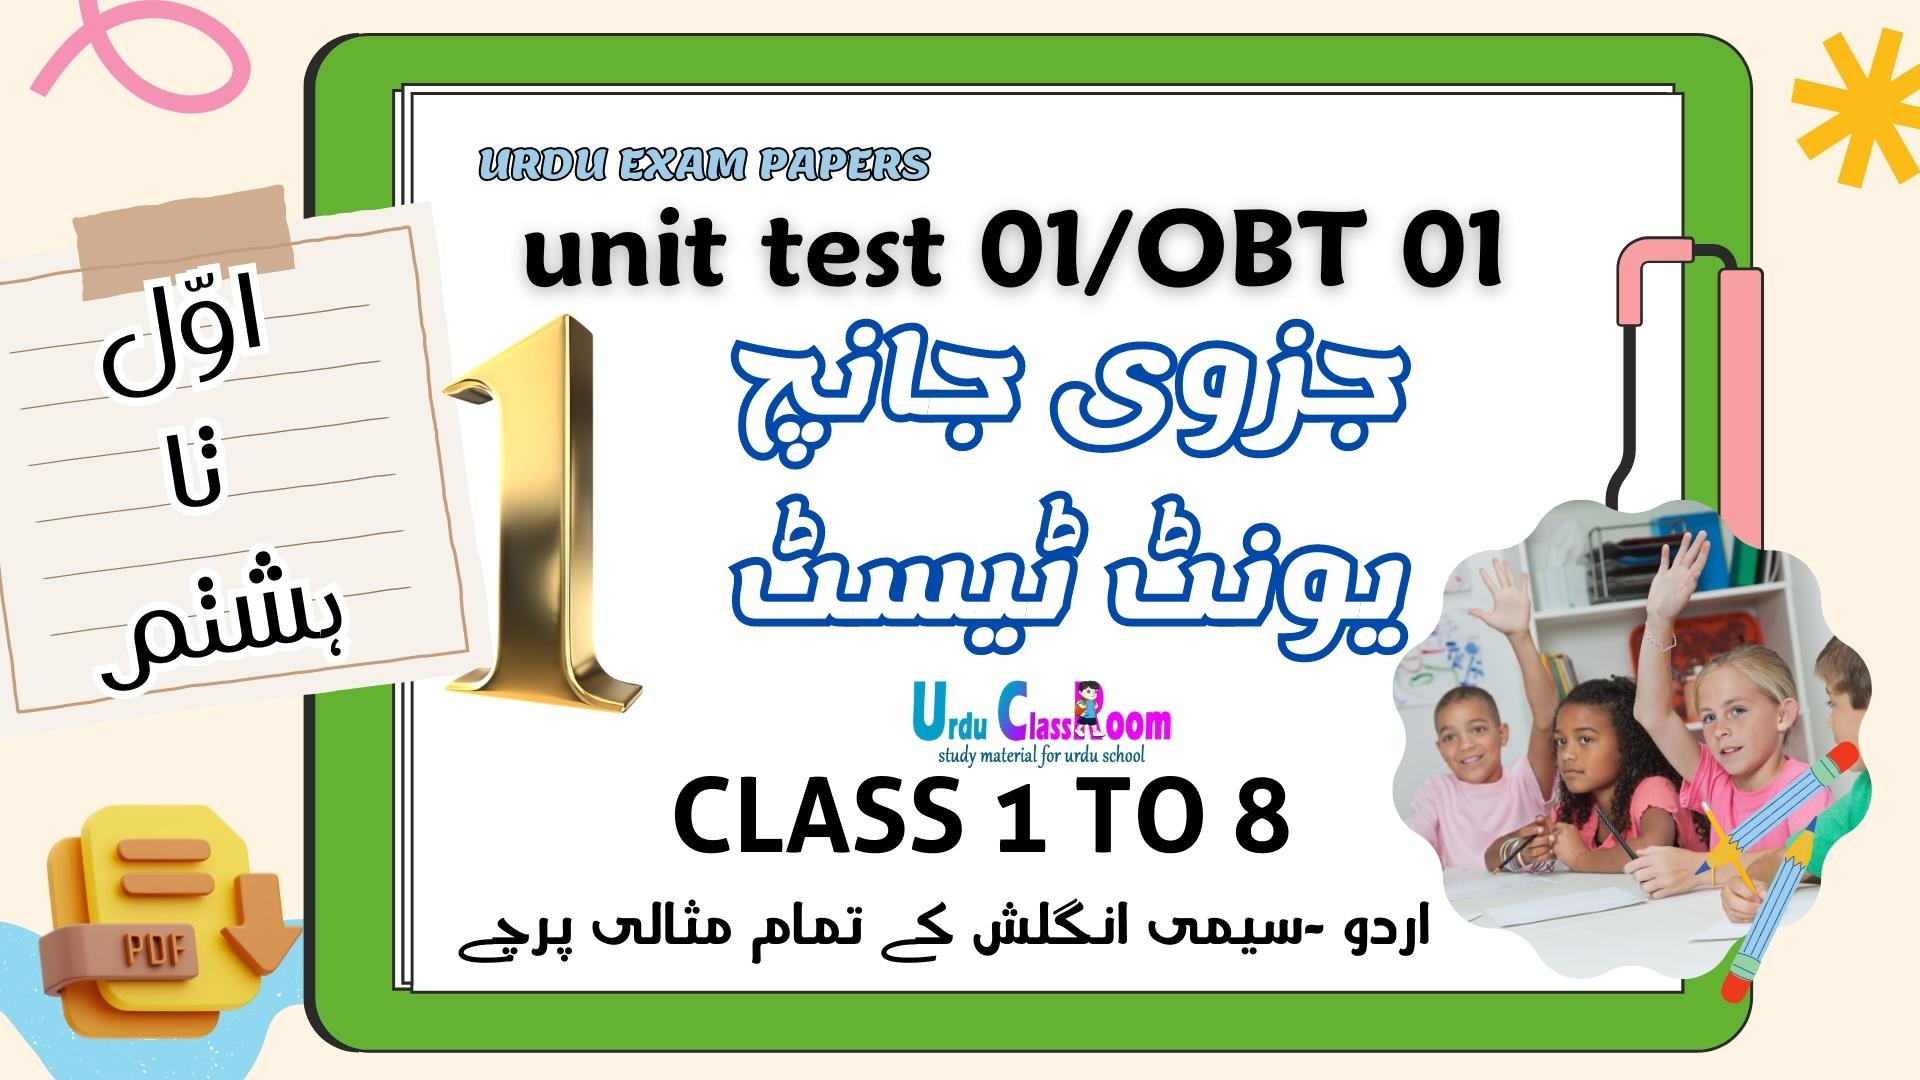 download unit test 01 exam papers for urdu and semi english for class 1 to 8